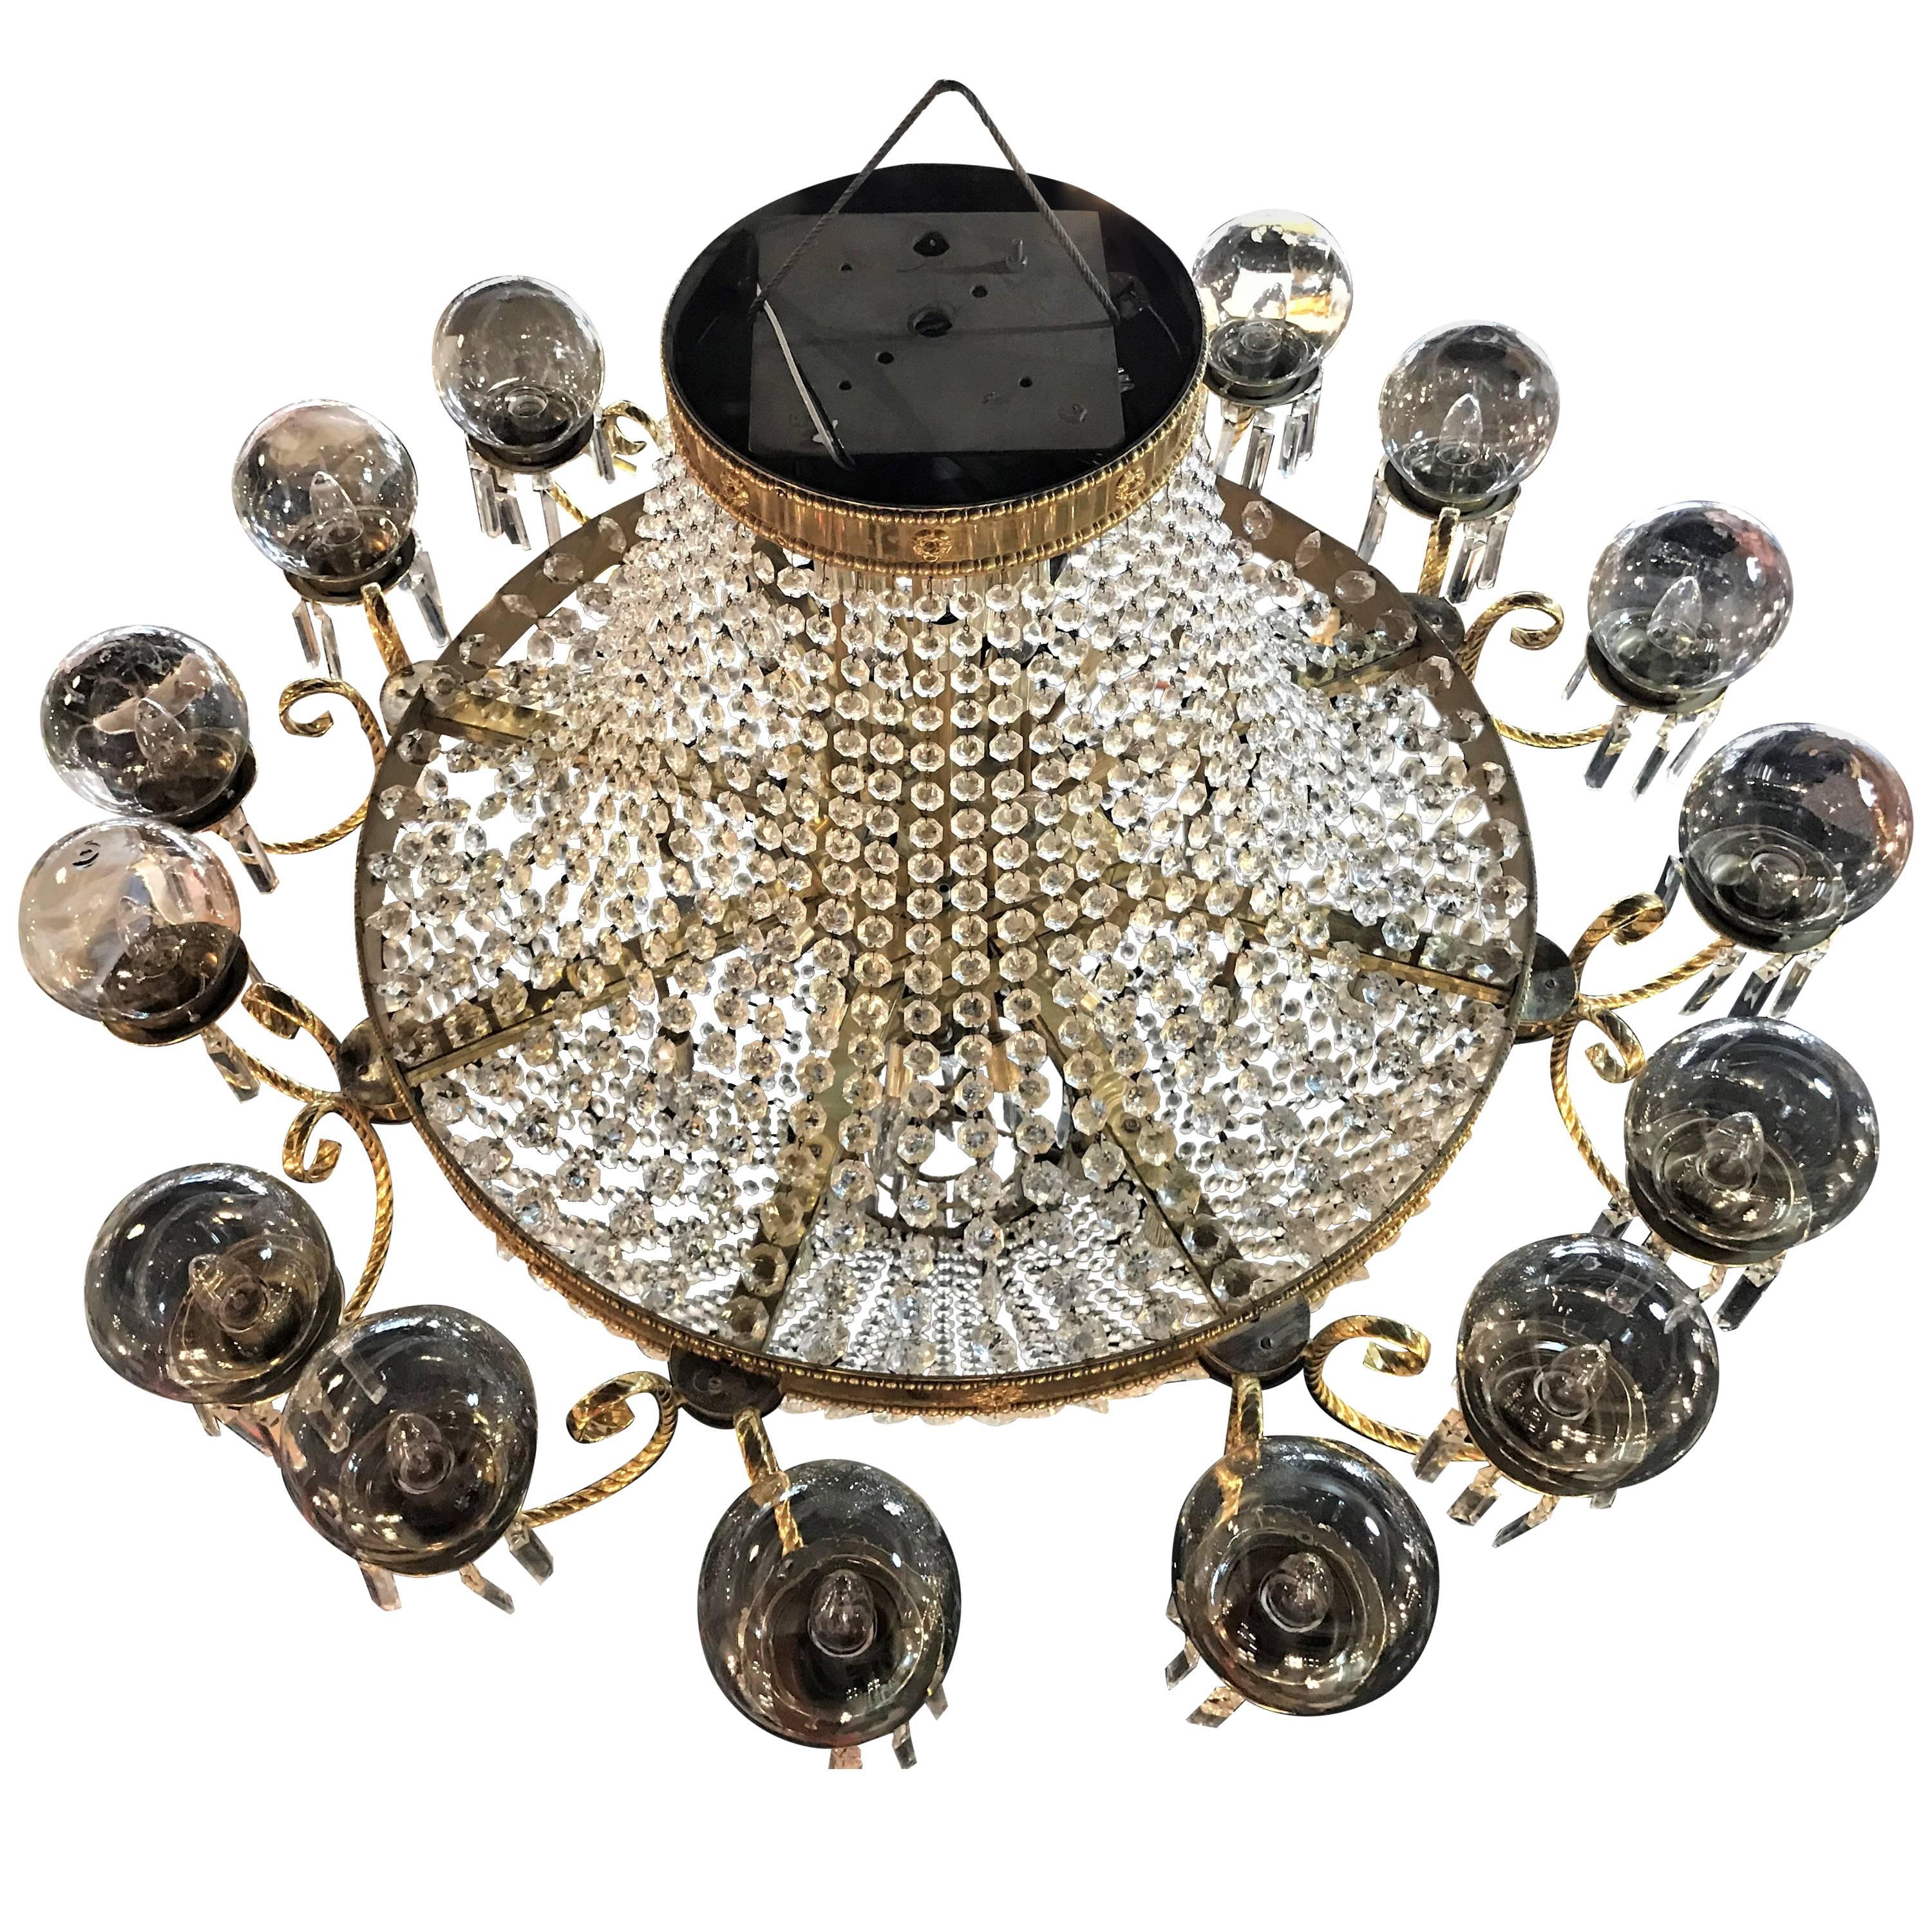 A palatial neoclassical style brass and crystal basket form chandelier with Hanging Prisms. Having 16 globe covered lights on brass circular plates and an interior holding too many lights to count, this astonishing chandelier is magnificent in not